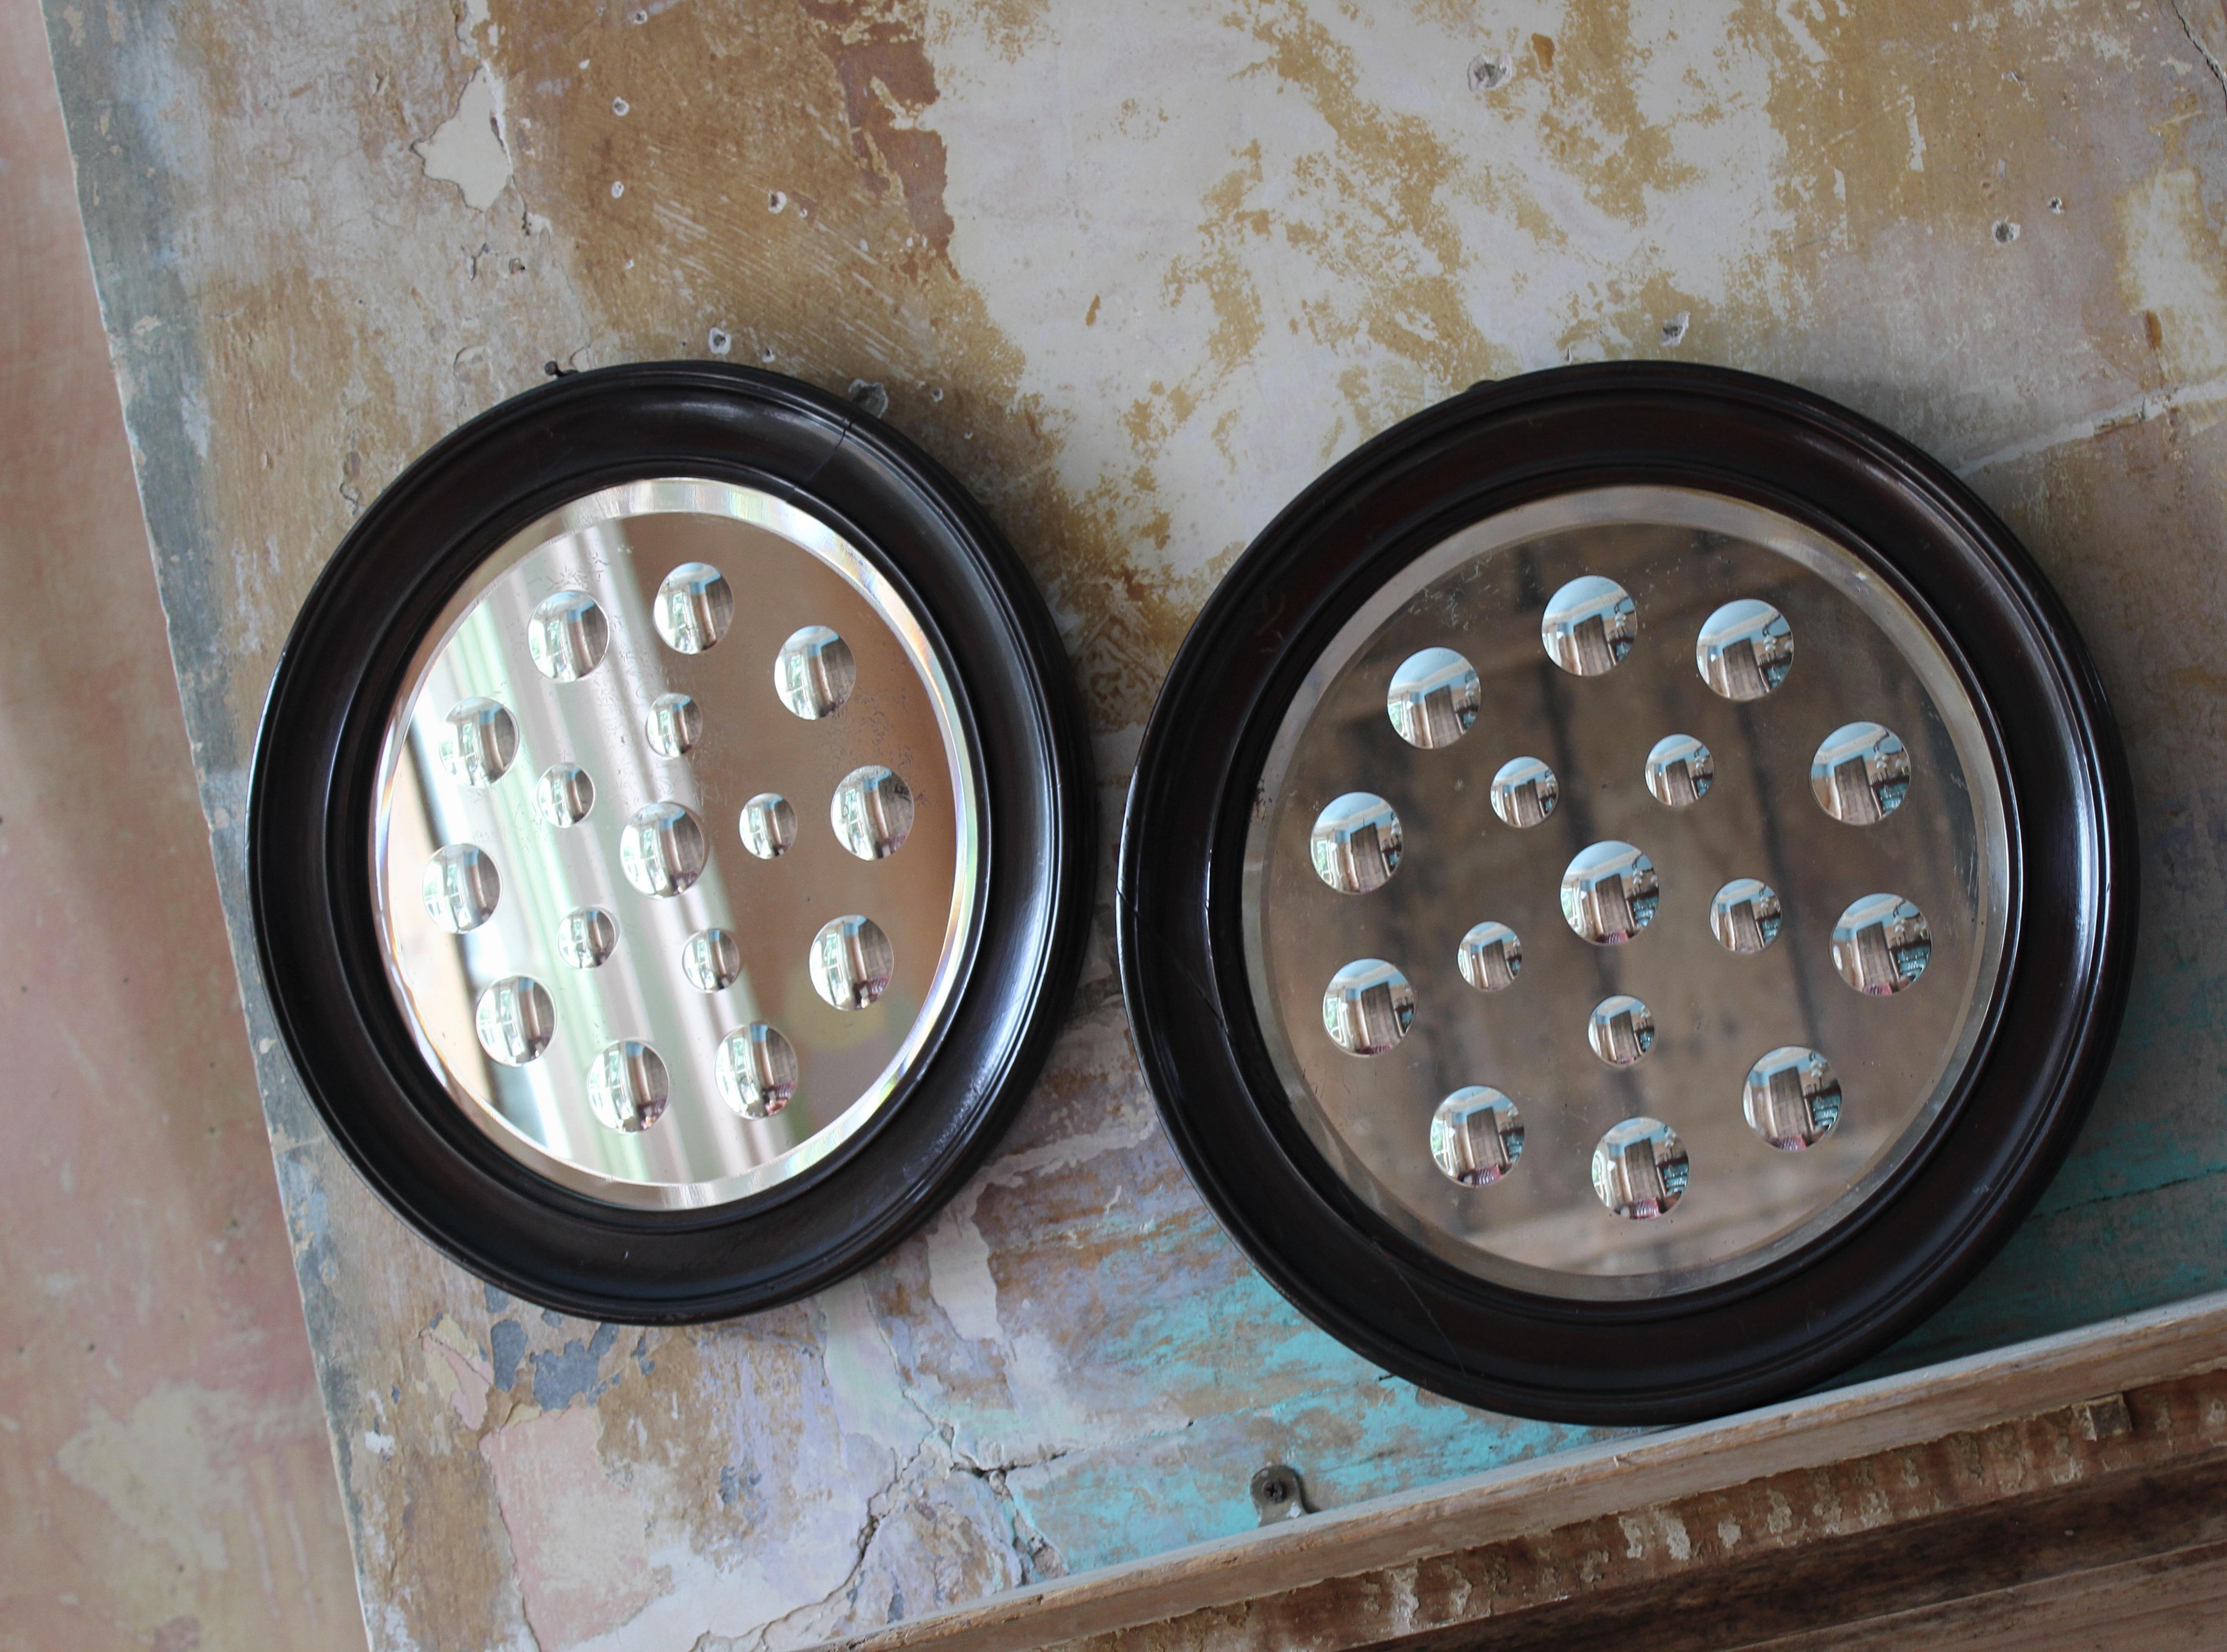 A good sized matching pair or early 20th century sorcerers mirrors with 11 large reverse ground optics and 5 smaller.

Housed in there original mahogany frames, some elderly spilts well repaired. Minor foxing to the mirror plates

38cm in diameter